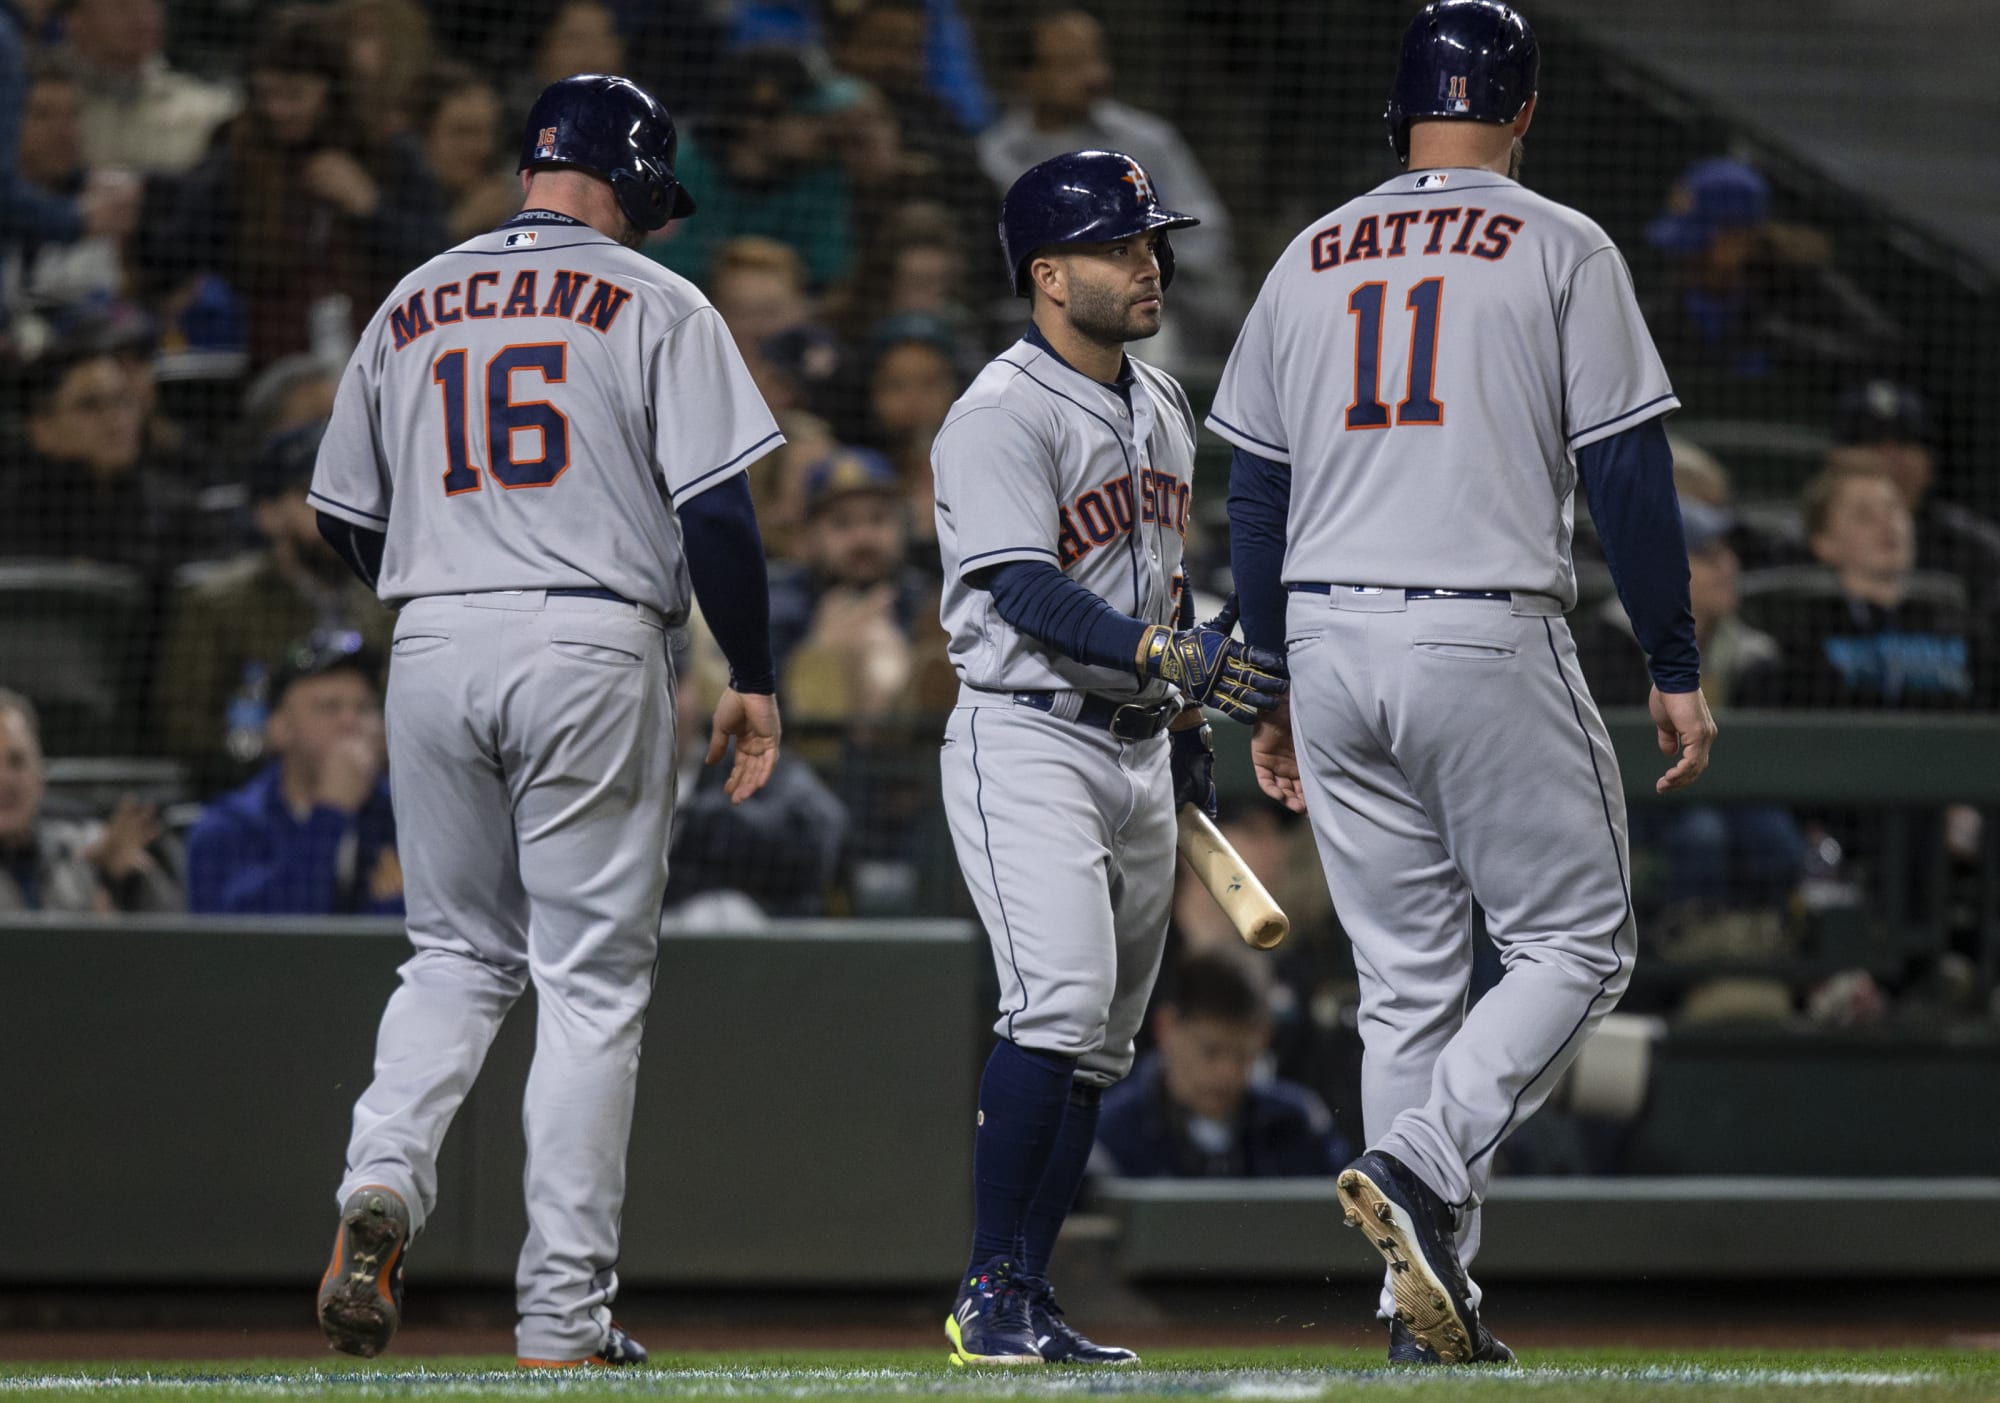 Houston Astros: Evan Gattis should get more playing time at catcher